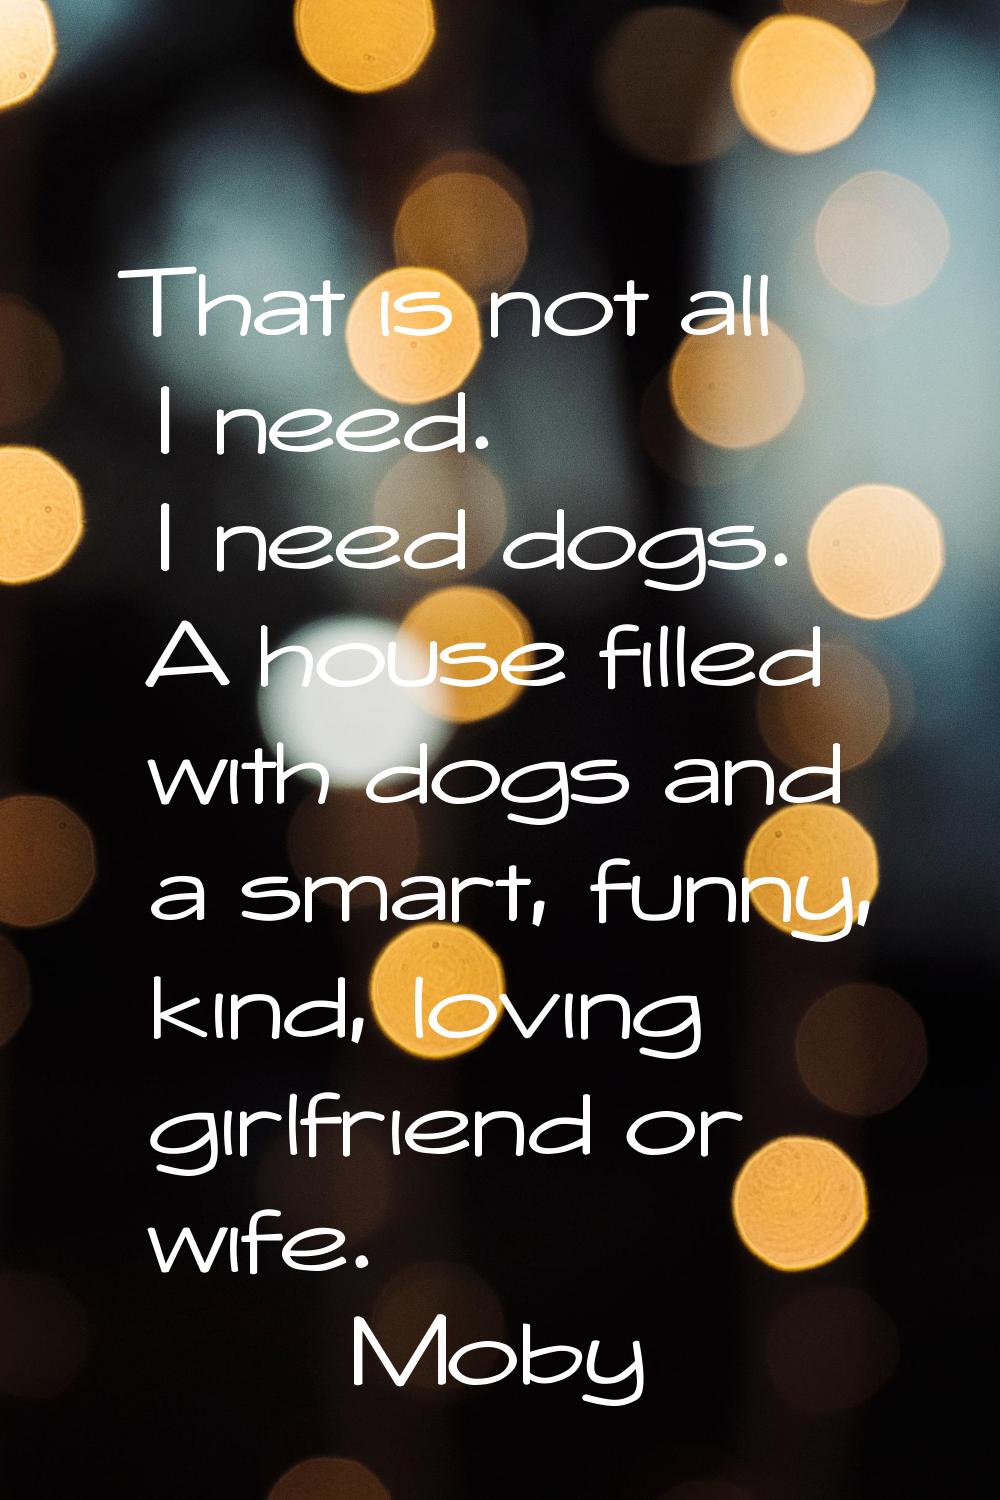 That is not all I need. I need dogs. A house filled with dogs and a smart, funny, kind, loving girl